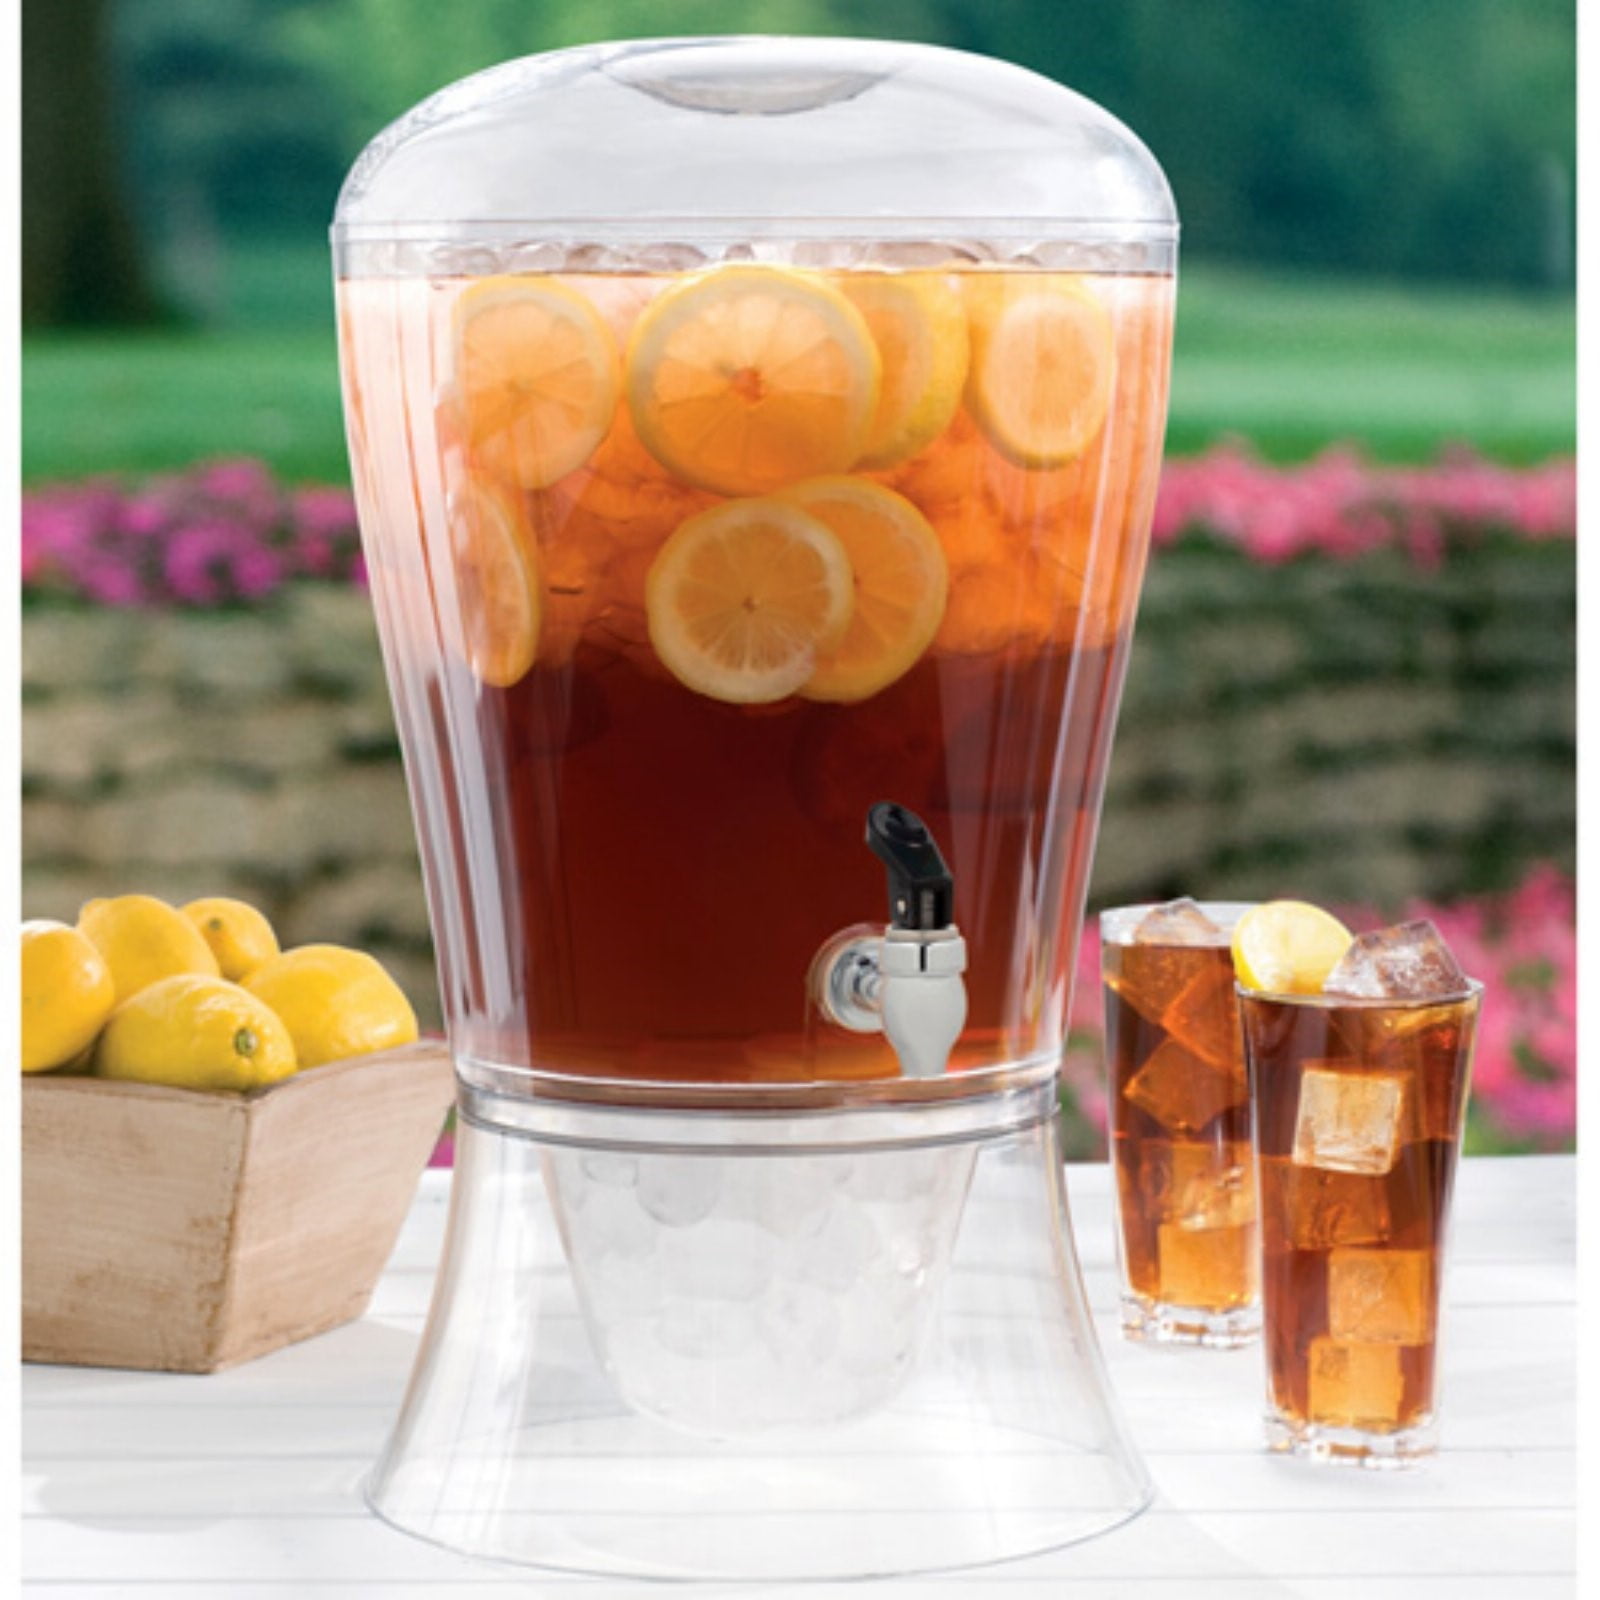 American Atelier Madera Beverage Dispenser High Quality Cold Drink Dispenser w/ 3-Gallon Capacity Glass Jug Leak-Proof Acrylic Spigot in Gorgeous Gift Box Great for Parties Weddings & More 